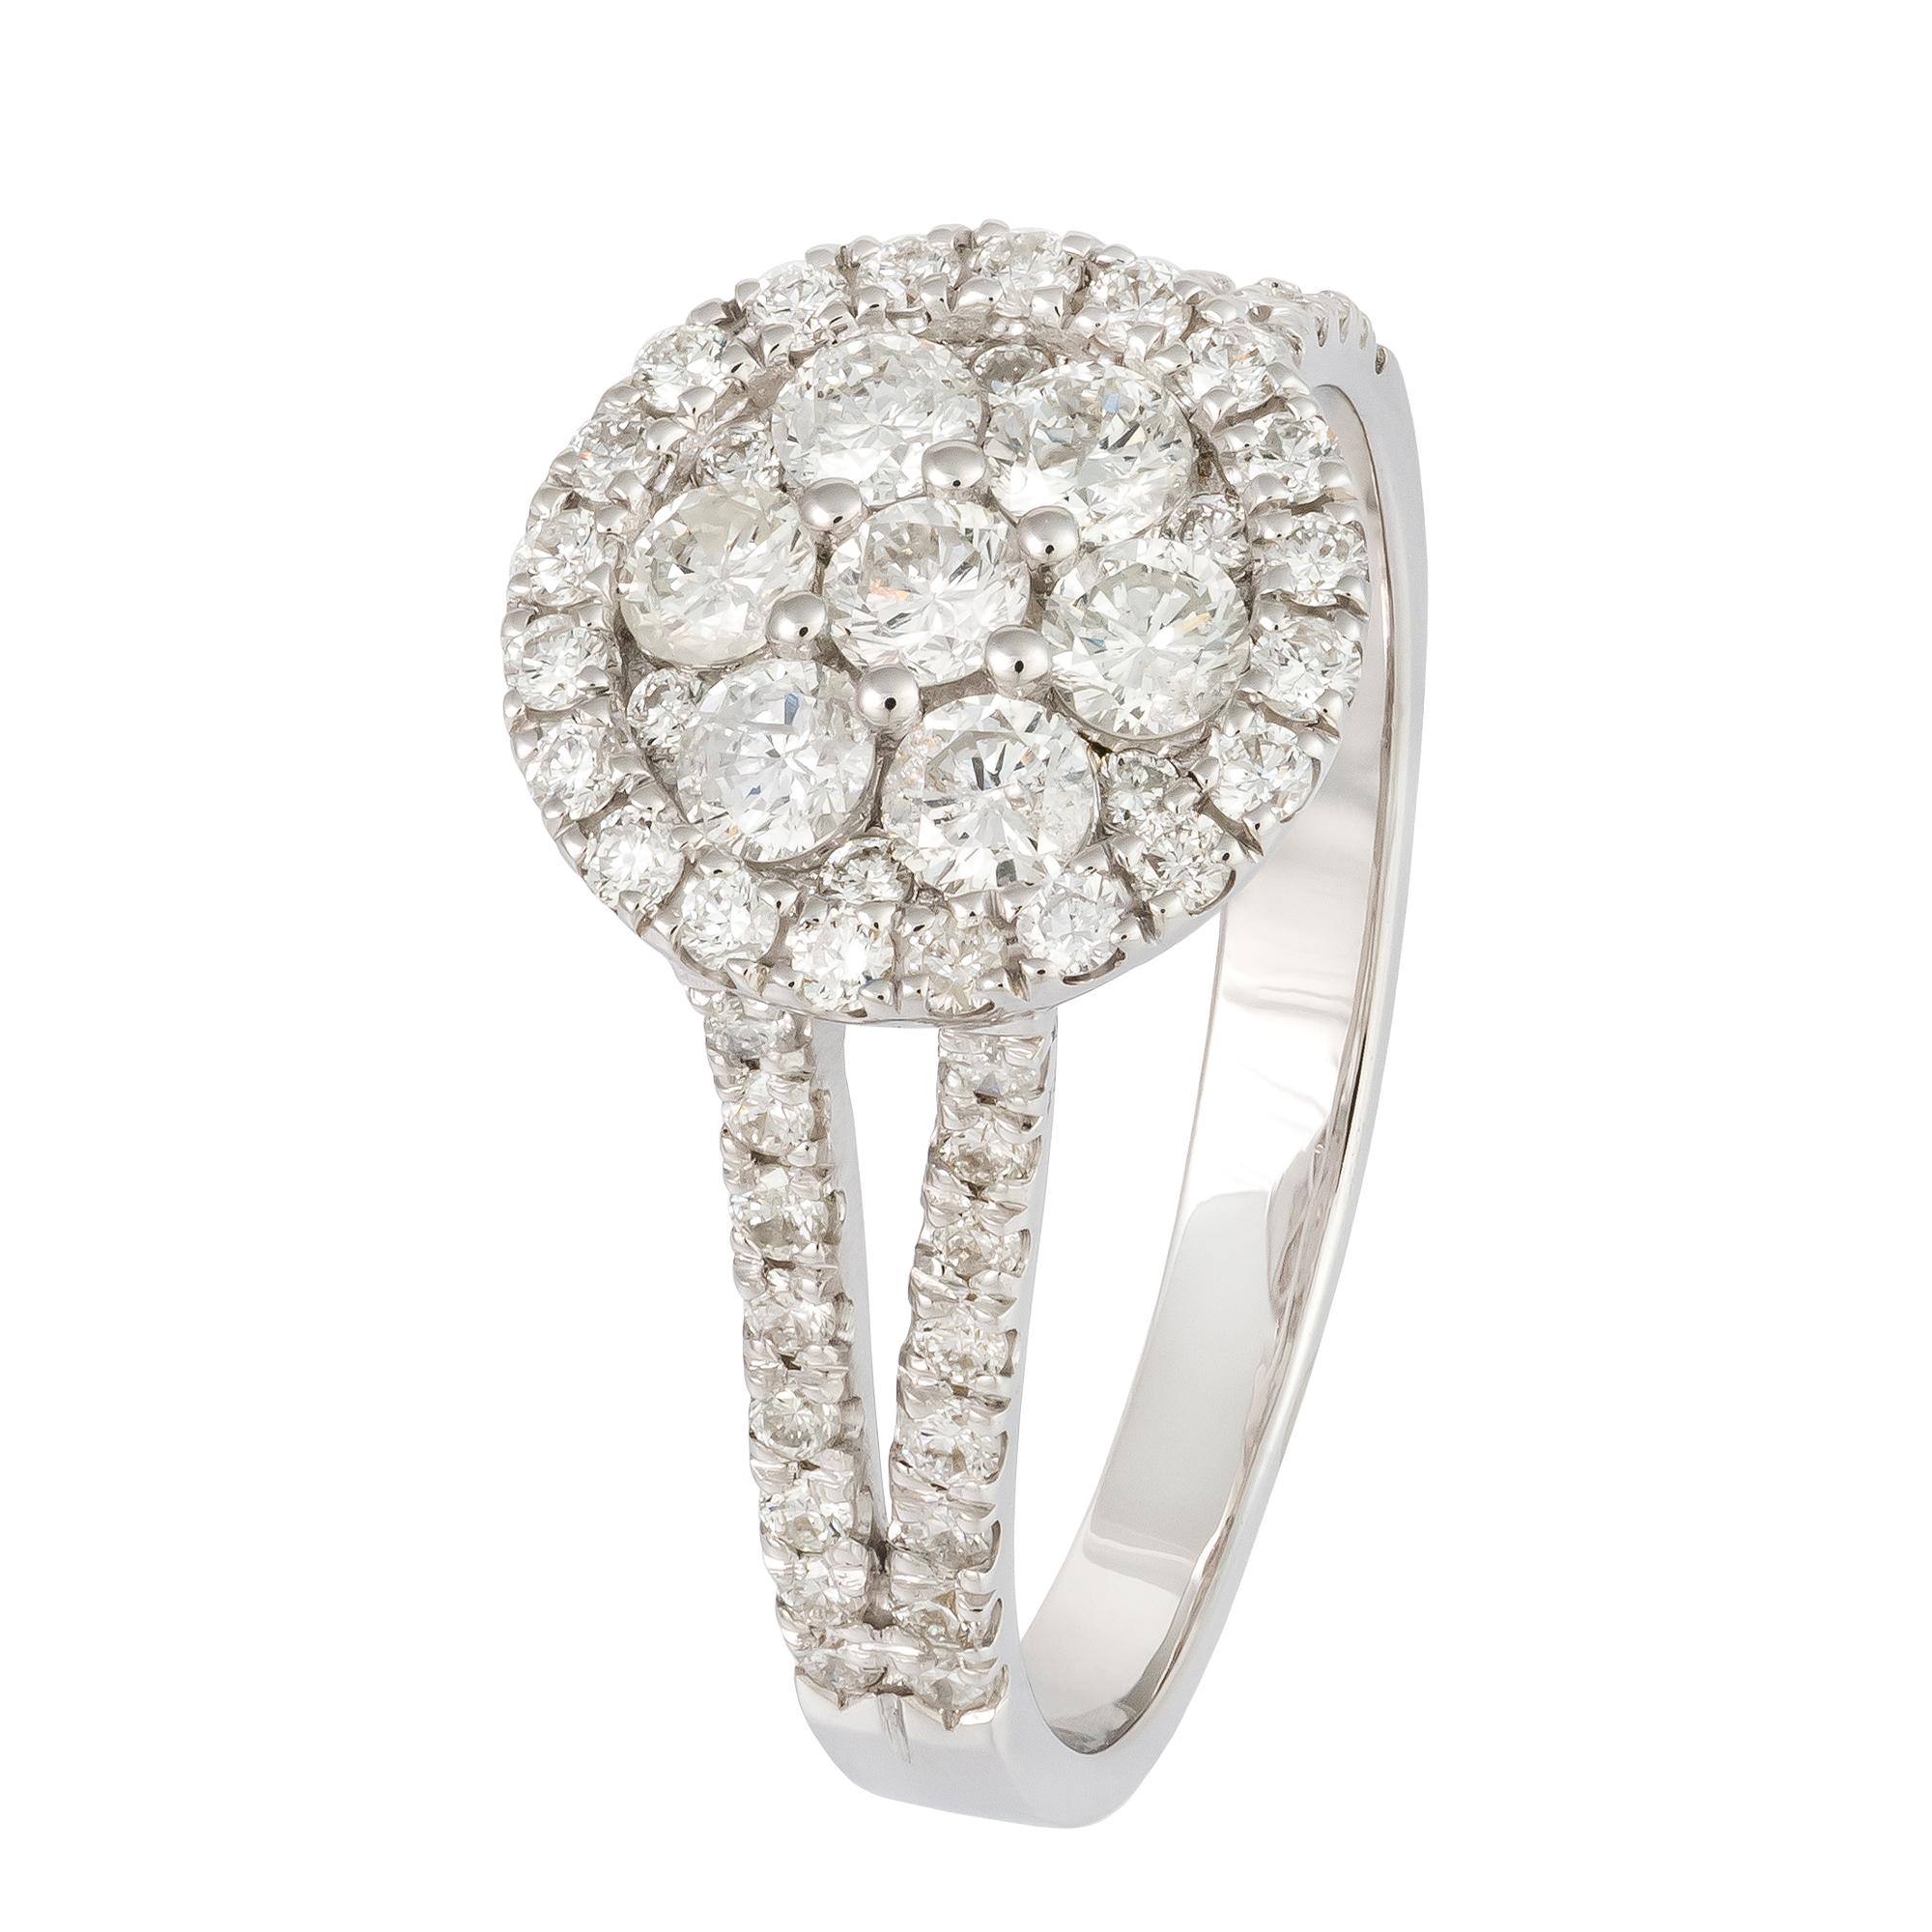 For Sale:  Statement  White 18K Gold White Diamond Ring For Her 4